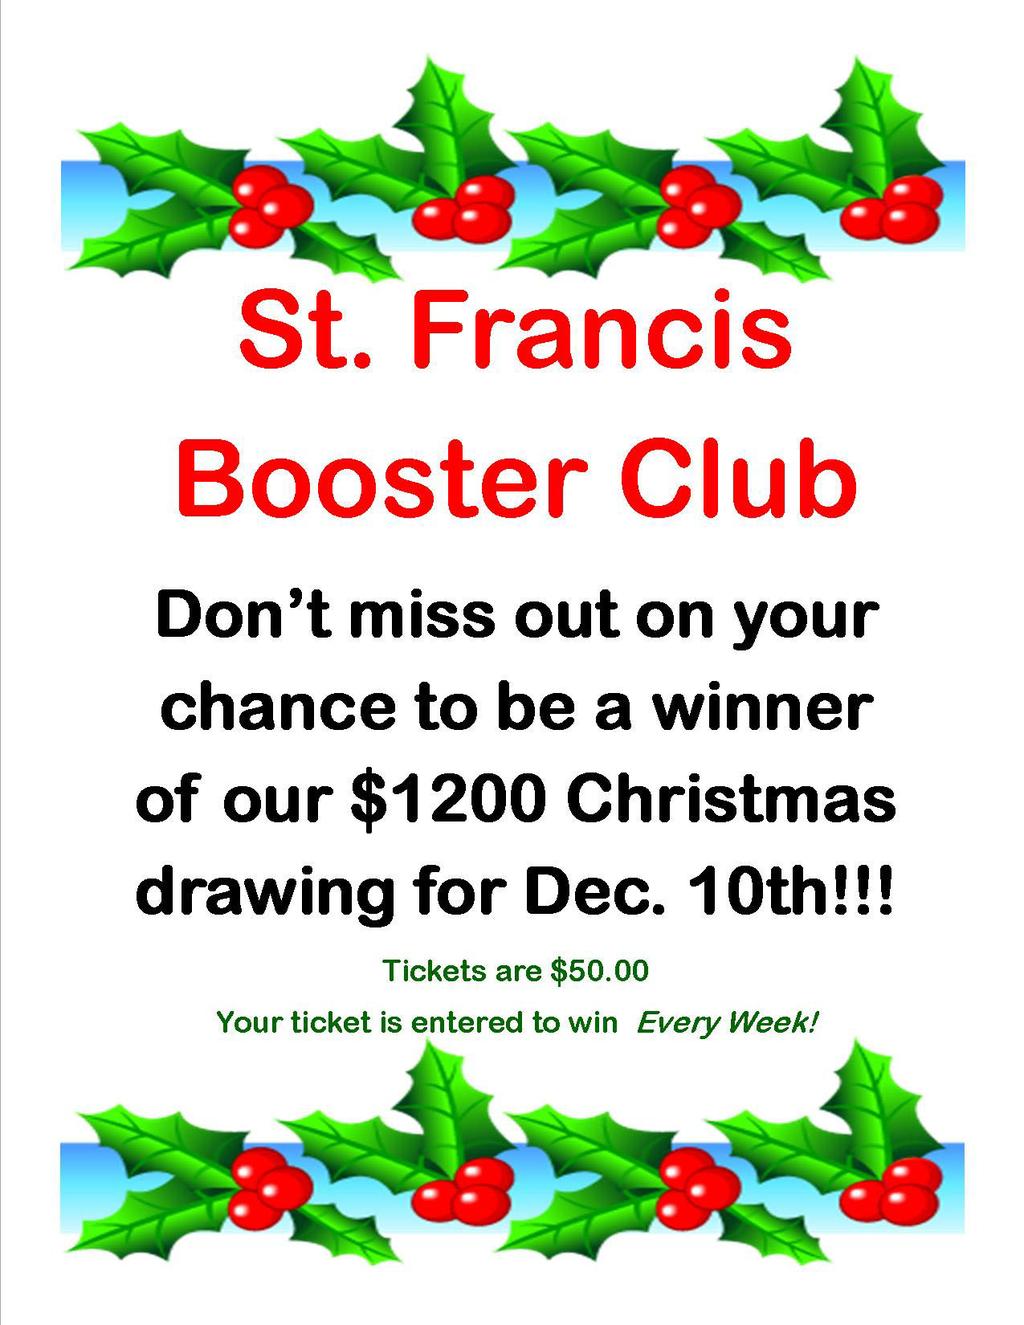 If you can help please contact Deacon Allan at 754-6436 Tuesday evening December 11th Rosary @6pm